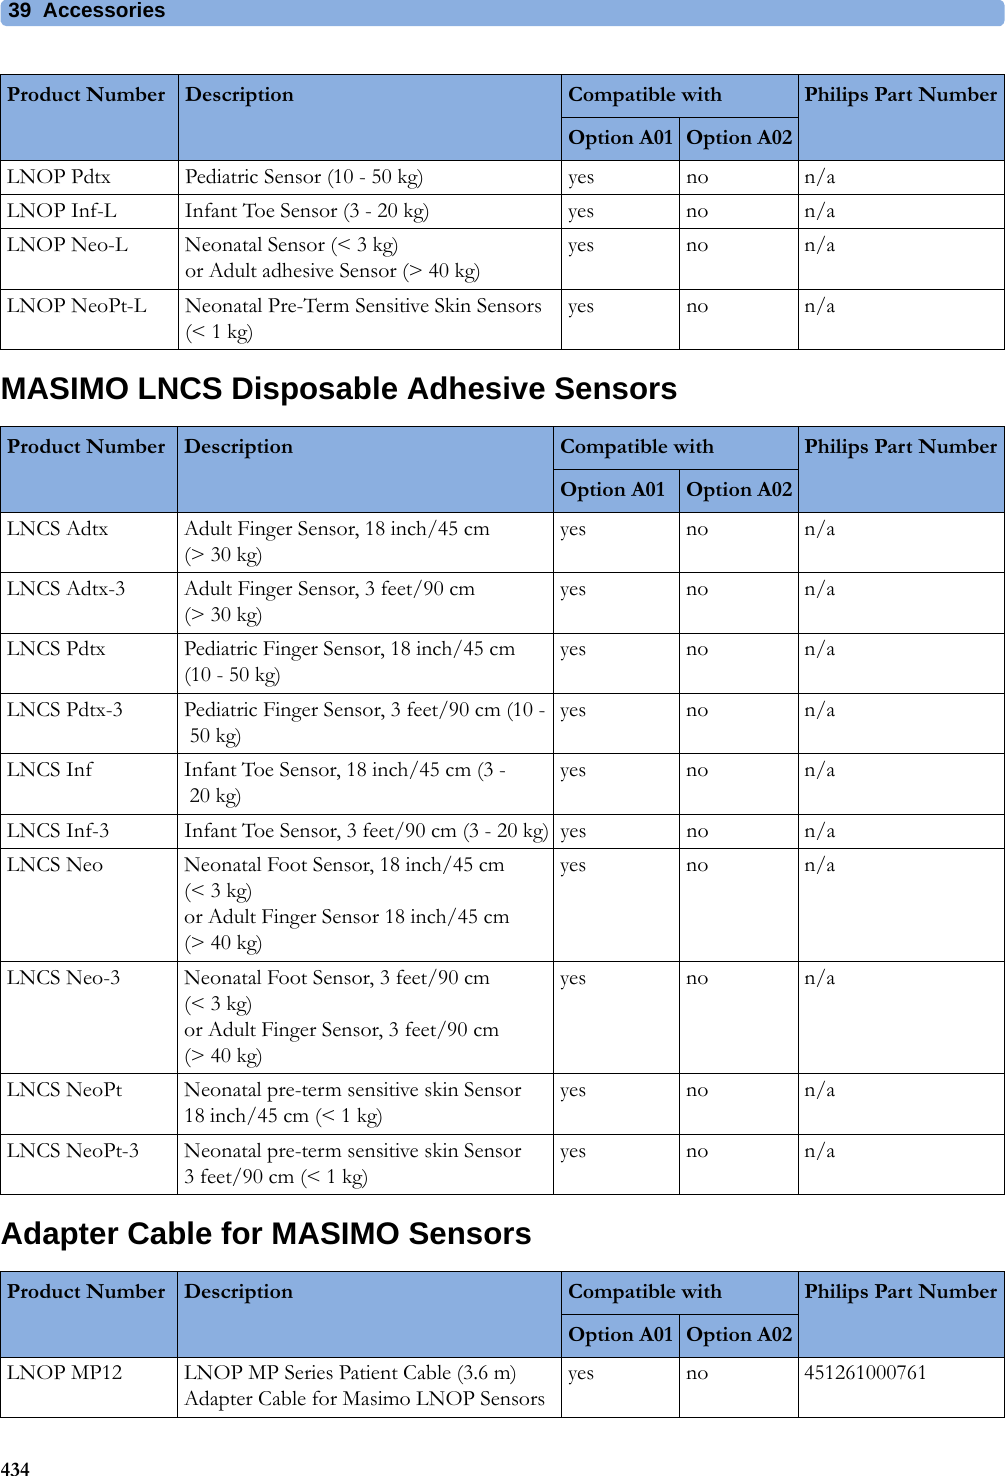 39 Accessories434MASIMO LNCS Disposable Adhesive SensorsAdapter Cable for MASIMO SensorsLNOP Pdtx Pediatric Sensor (10 - 50 kg) yes no n/aLNOP Inf-L Infant Toe Sensor (3 - 20 kg) yes no n/aLNOP Neo-L Neonatal Sensor (&lt; 3 kg)or Adult adhesive Sensor (&gt; 40 kg)yes no n/aLNOP NeoPt-L Neonatal Pre-Term Sensitive Skin Sensors (&lt; 1 kg)yes no n/aProduct Number Description Compatible with Philips Part NumberOption A01 Option A02Product Number Description Compatible with Philips Part NumberOption A01 Option A02LNCS Adtx Adult Finger Sensor, 18 inch/45 cm (&gt; 30 kg)yes no n/aLNCS Adtx-3 Adult Finger Sensor, 3 feet/90 cm (&gt; 30 kg)yes no n/aLNCS Pdtx Pediatric Finger Sensor, 18 inch/45 cm (10 - 50 kg)yes no n/aLNCS Pdtx-3 Pediatric Finger Sensor, 3 feet/90 cm (10 -50 kg)yes no n/aLNCS Inf Infant Toe Sensor, 18 inch/45 cm (3 -20 kg)yes no n/aLNCS Inf-3 Infant Toe Sensor, 3 feet/90 cm (3 - 20 kg) yes no n/aLNCS Neo Neonatal Foot Sensor, 18 inch/45 cm (&lt; 3 kg)or Adult Finger Sensor 18 inch/45 cm (&gt; 40 kg)yes no n/aLNCS Neo-3 Neonatal Foot Sensor, 3 feet/90 cm (&lt; 3 kg)or Adult Finger Sensor, 3 feet/90 cm (&gt; 40 kg)yes no n/aLNCS NeoPt Neonatal pre-term sensitive skin Sensor 18 inch/45 cm (&lt; 1 kg)yes no n/aLNCS NeoPt-3 Neonatal pre-term sensitive skin Sensor 3feet/90cm (&lt;1 kg)yes no n/aProduct Number Description Compatible with Philips Part NumberOption A01 Option A02LNOP MP12 LNOP MP Series Patient Cable (3.6 m) Adapter Cable for Masimo LNOP Sensorsyes no 451261000761